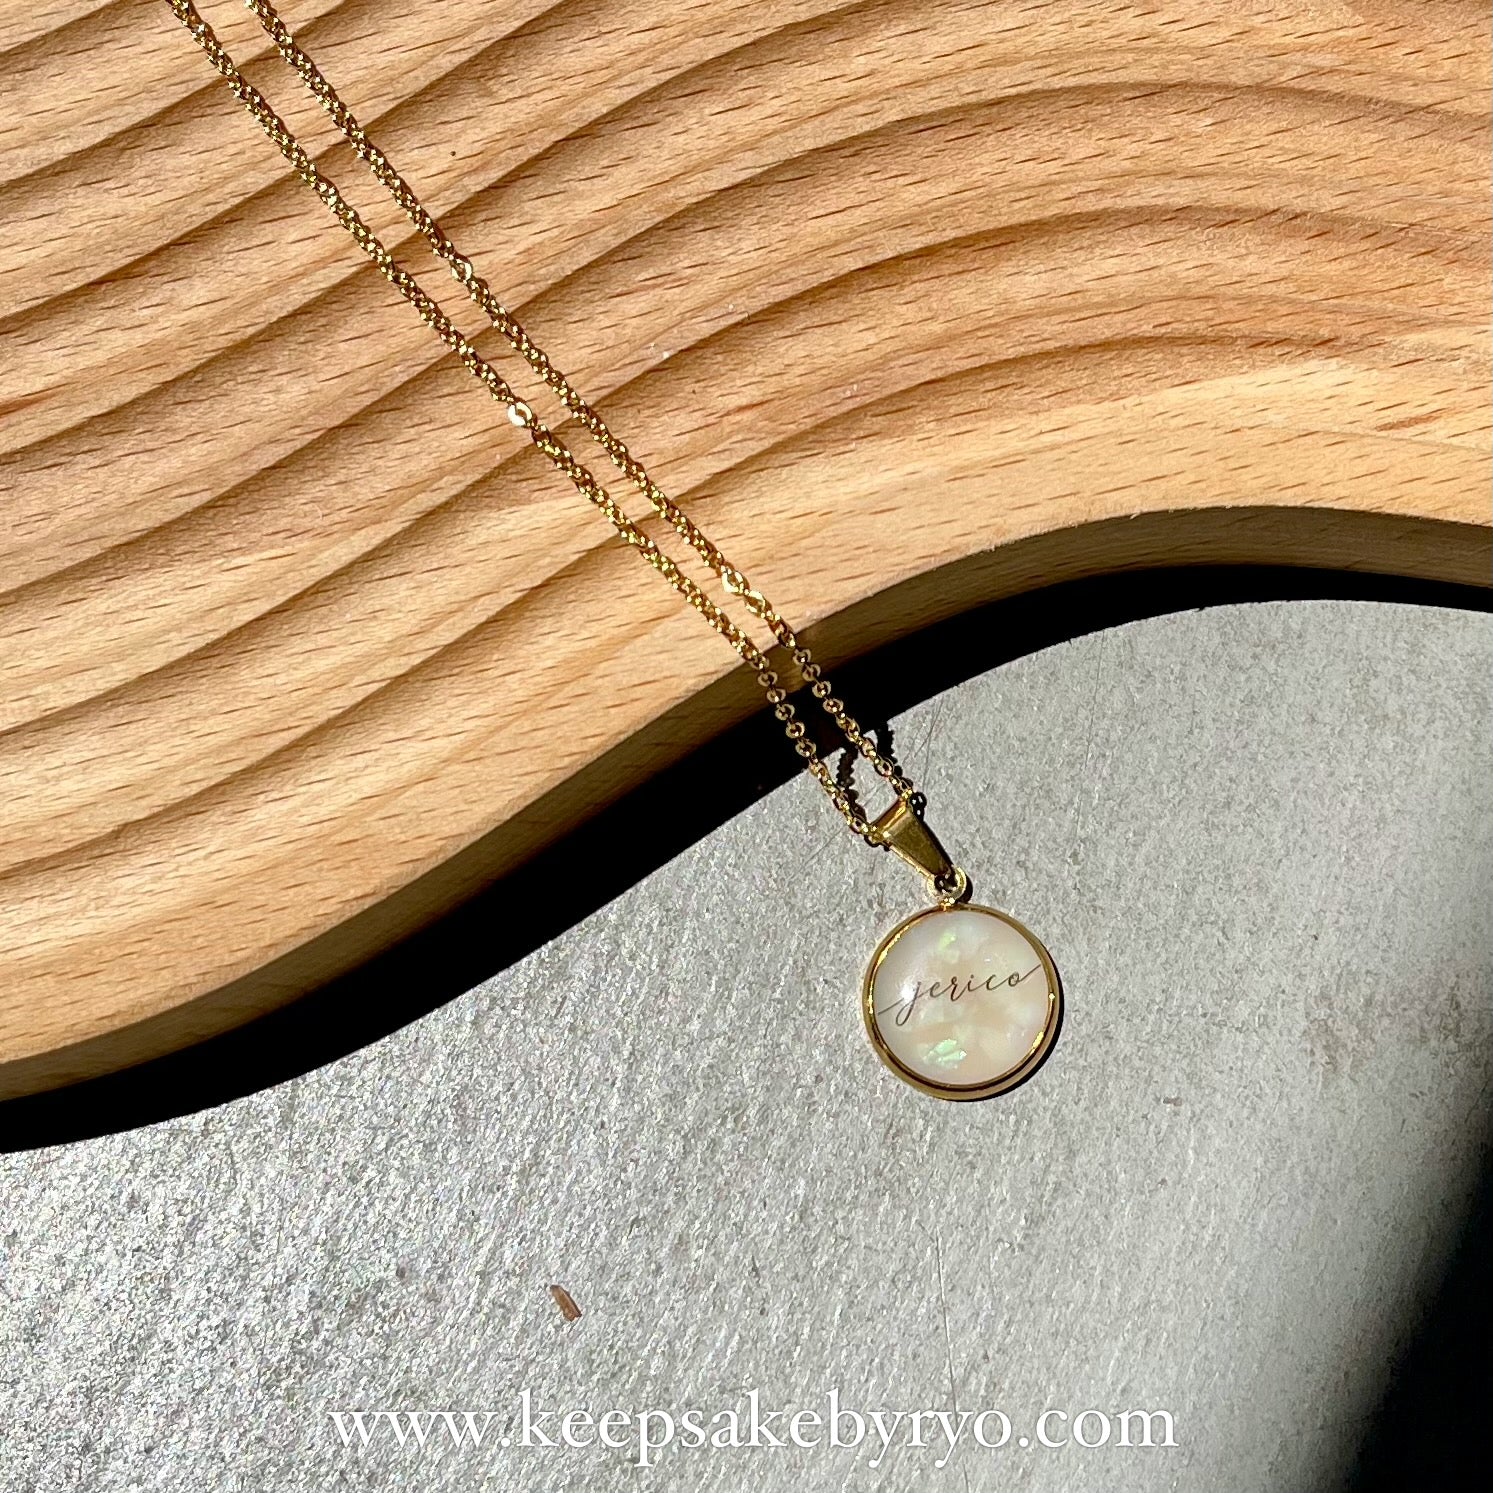 15MM CLASSIC ROUND BREASTMILK PENDANT WITH DECORATIVE FLAKES